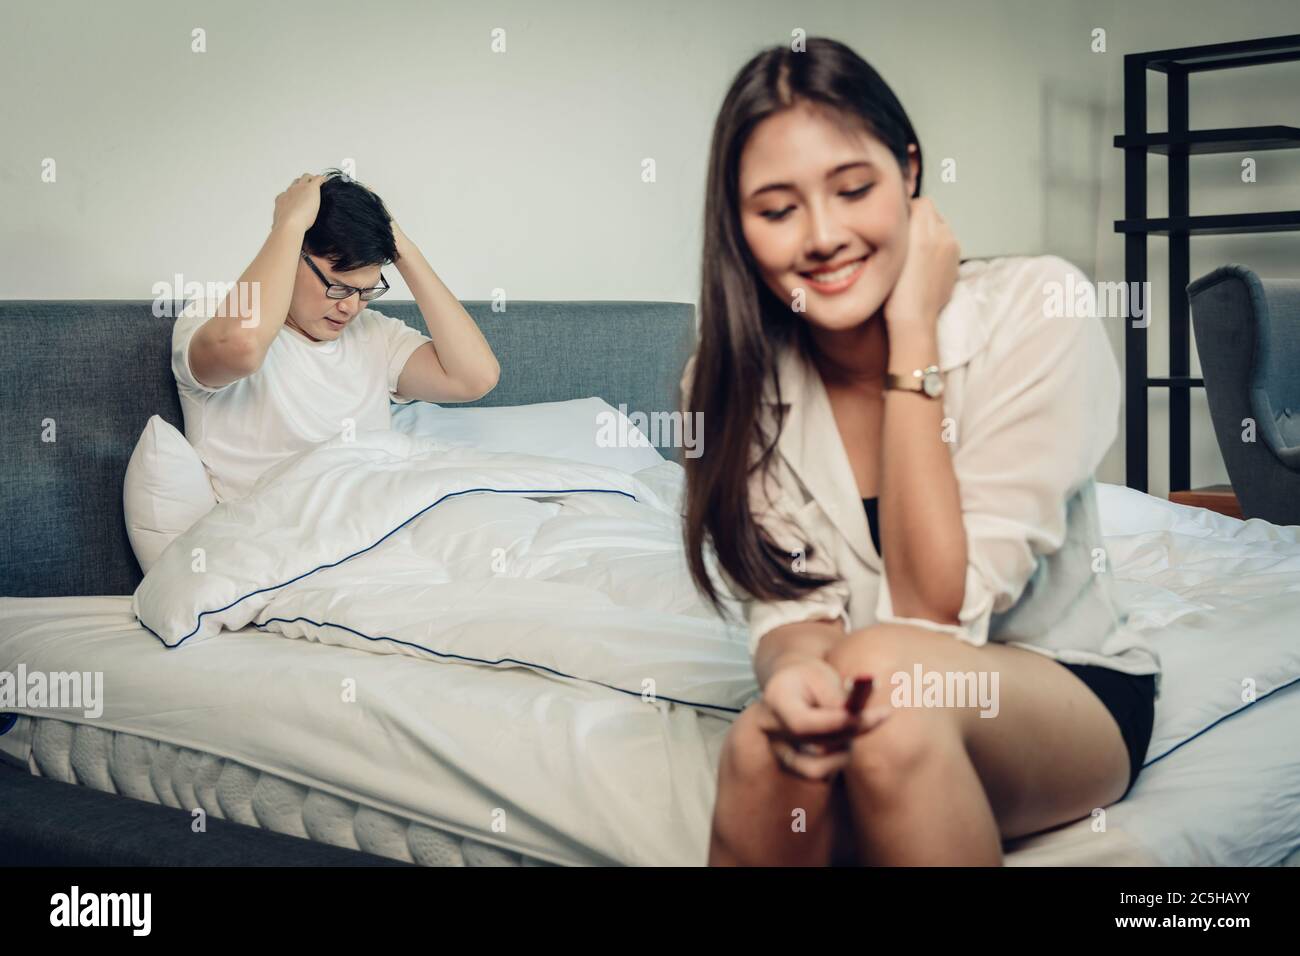 Unplanned Pregnancy concept, Wife is happy to know she pregnant while the husband boyfriend is stress and feel not ready to be father Stock Photo photo